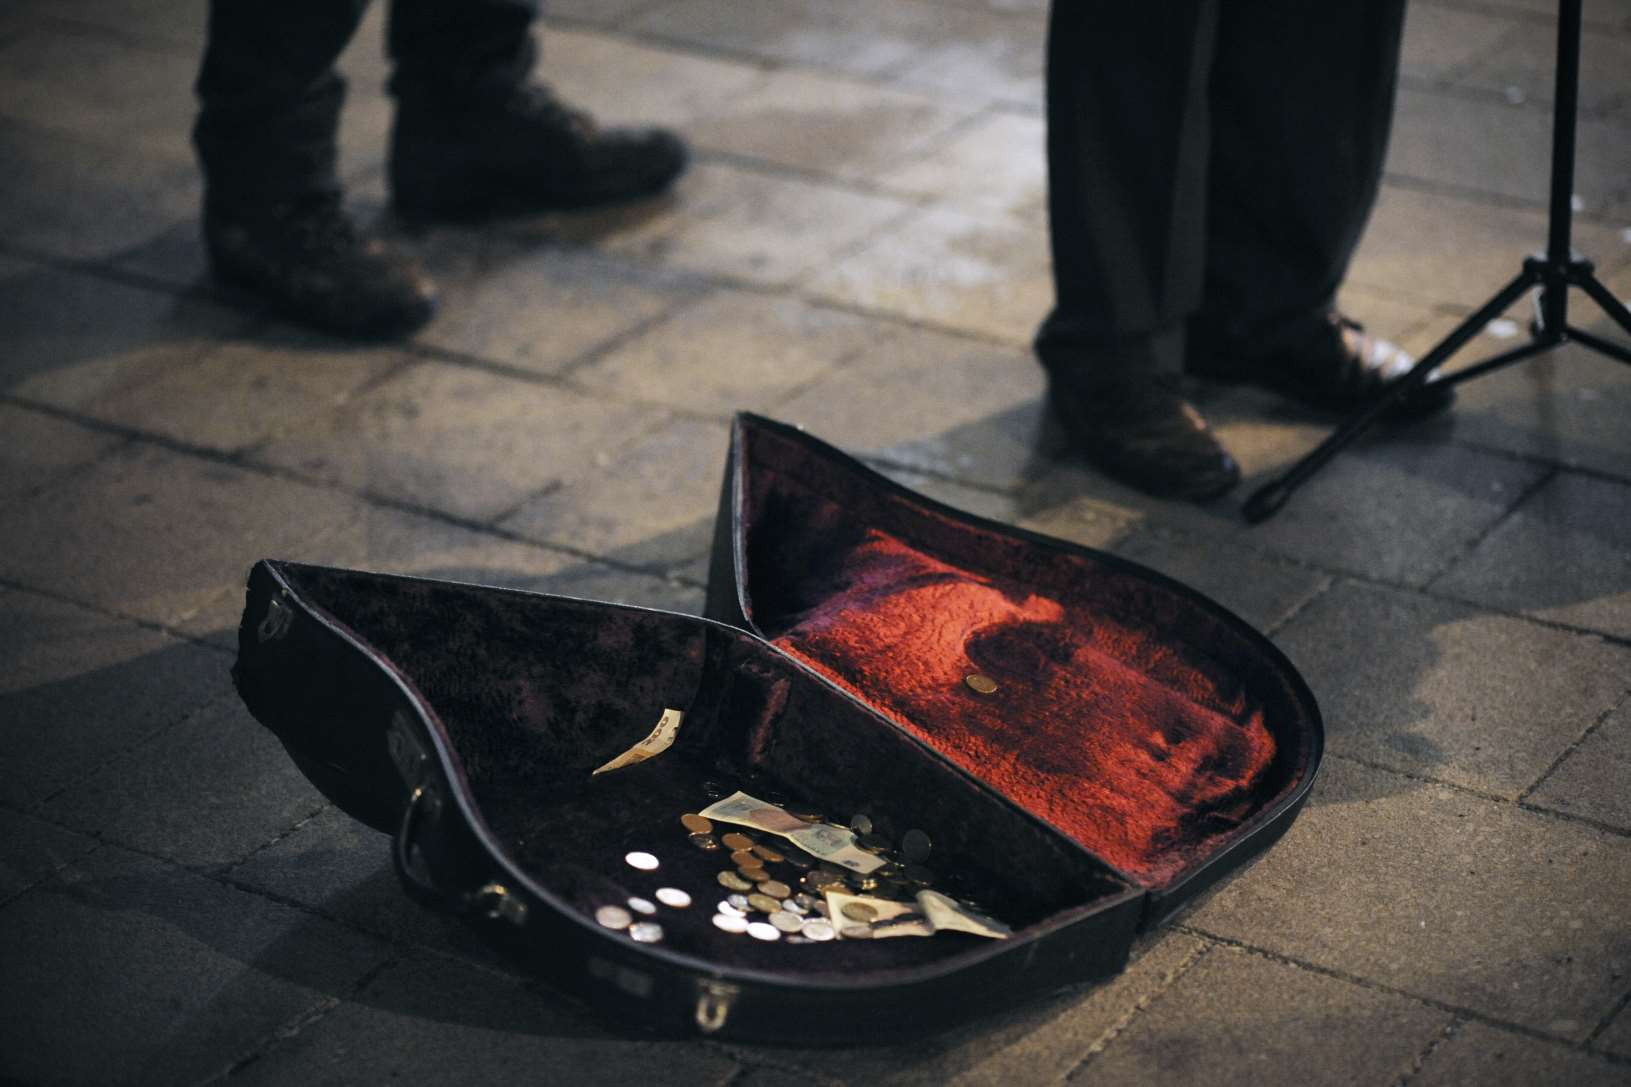 A busker collecting money